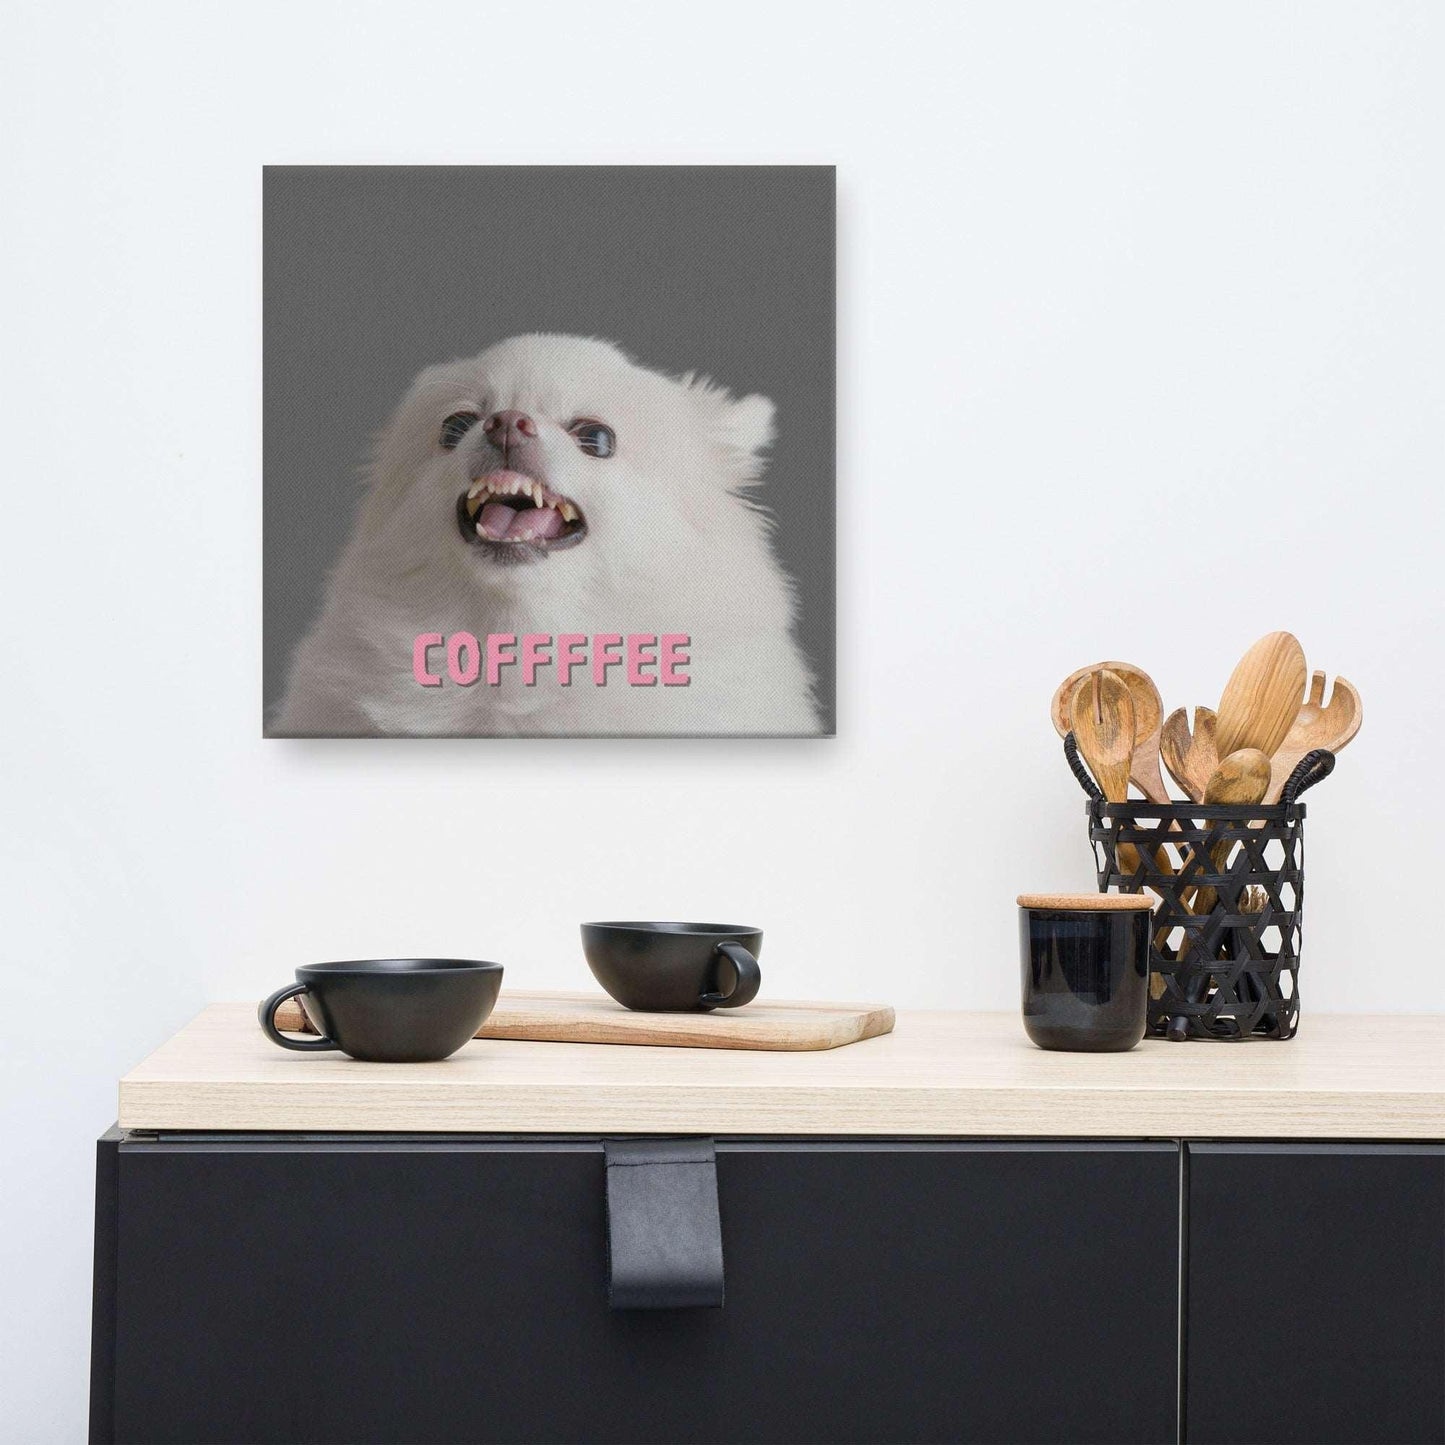 COFFFFEE - one of the famous Chimigos chihuahua memes.  This is a vivid and fade resistant art print on a stretched canvas. A cute and fluffy white chihuahua is feeling tetchy first thing in the morning and barking - snapping - their order for coffee. Better shut up and put the kettle on already! A funny and stylish gift idea for someone who loves chihuahuas and coffee. Or a warning to your family or guests that you're not a morning person, and to keep it cool in the morning kitchen.